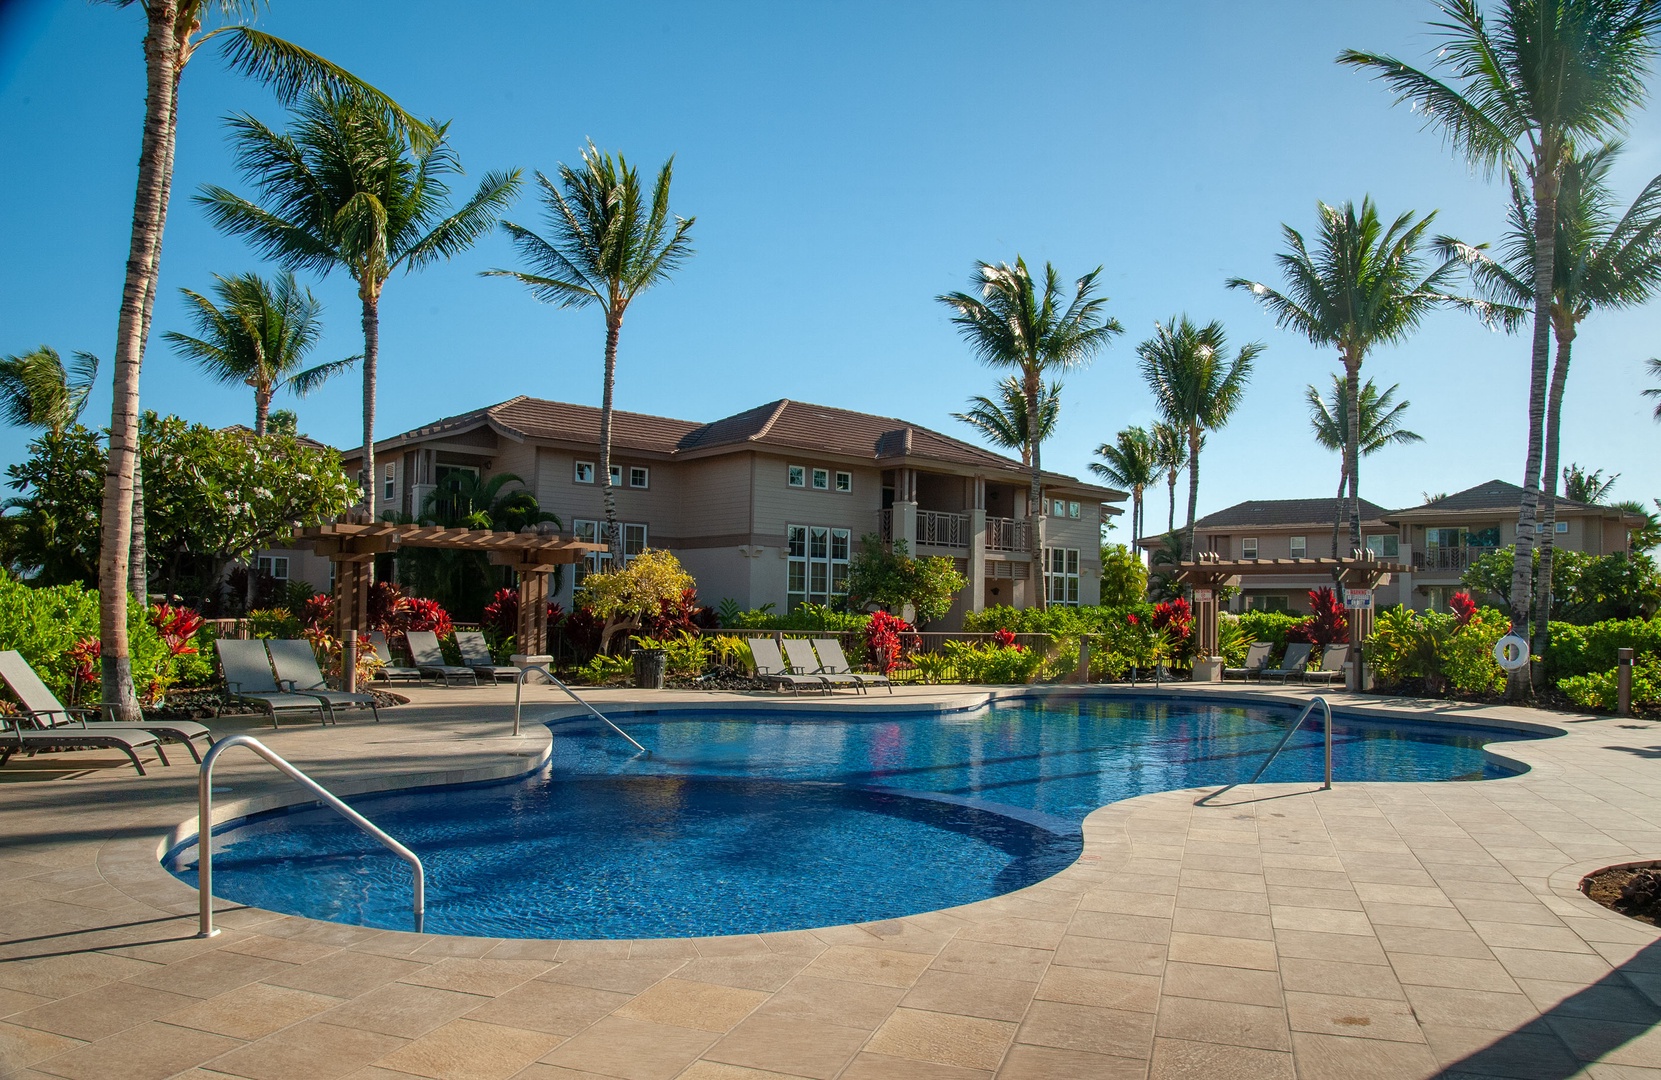 Waikoloa Vacation Rentals, Waikoloa Colony Villas 403 - Closest Pool to Your Villa w/ Loungers, BBQ Area and Wading Pool